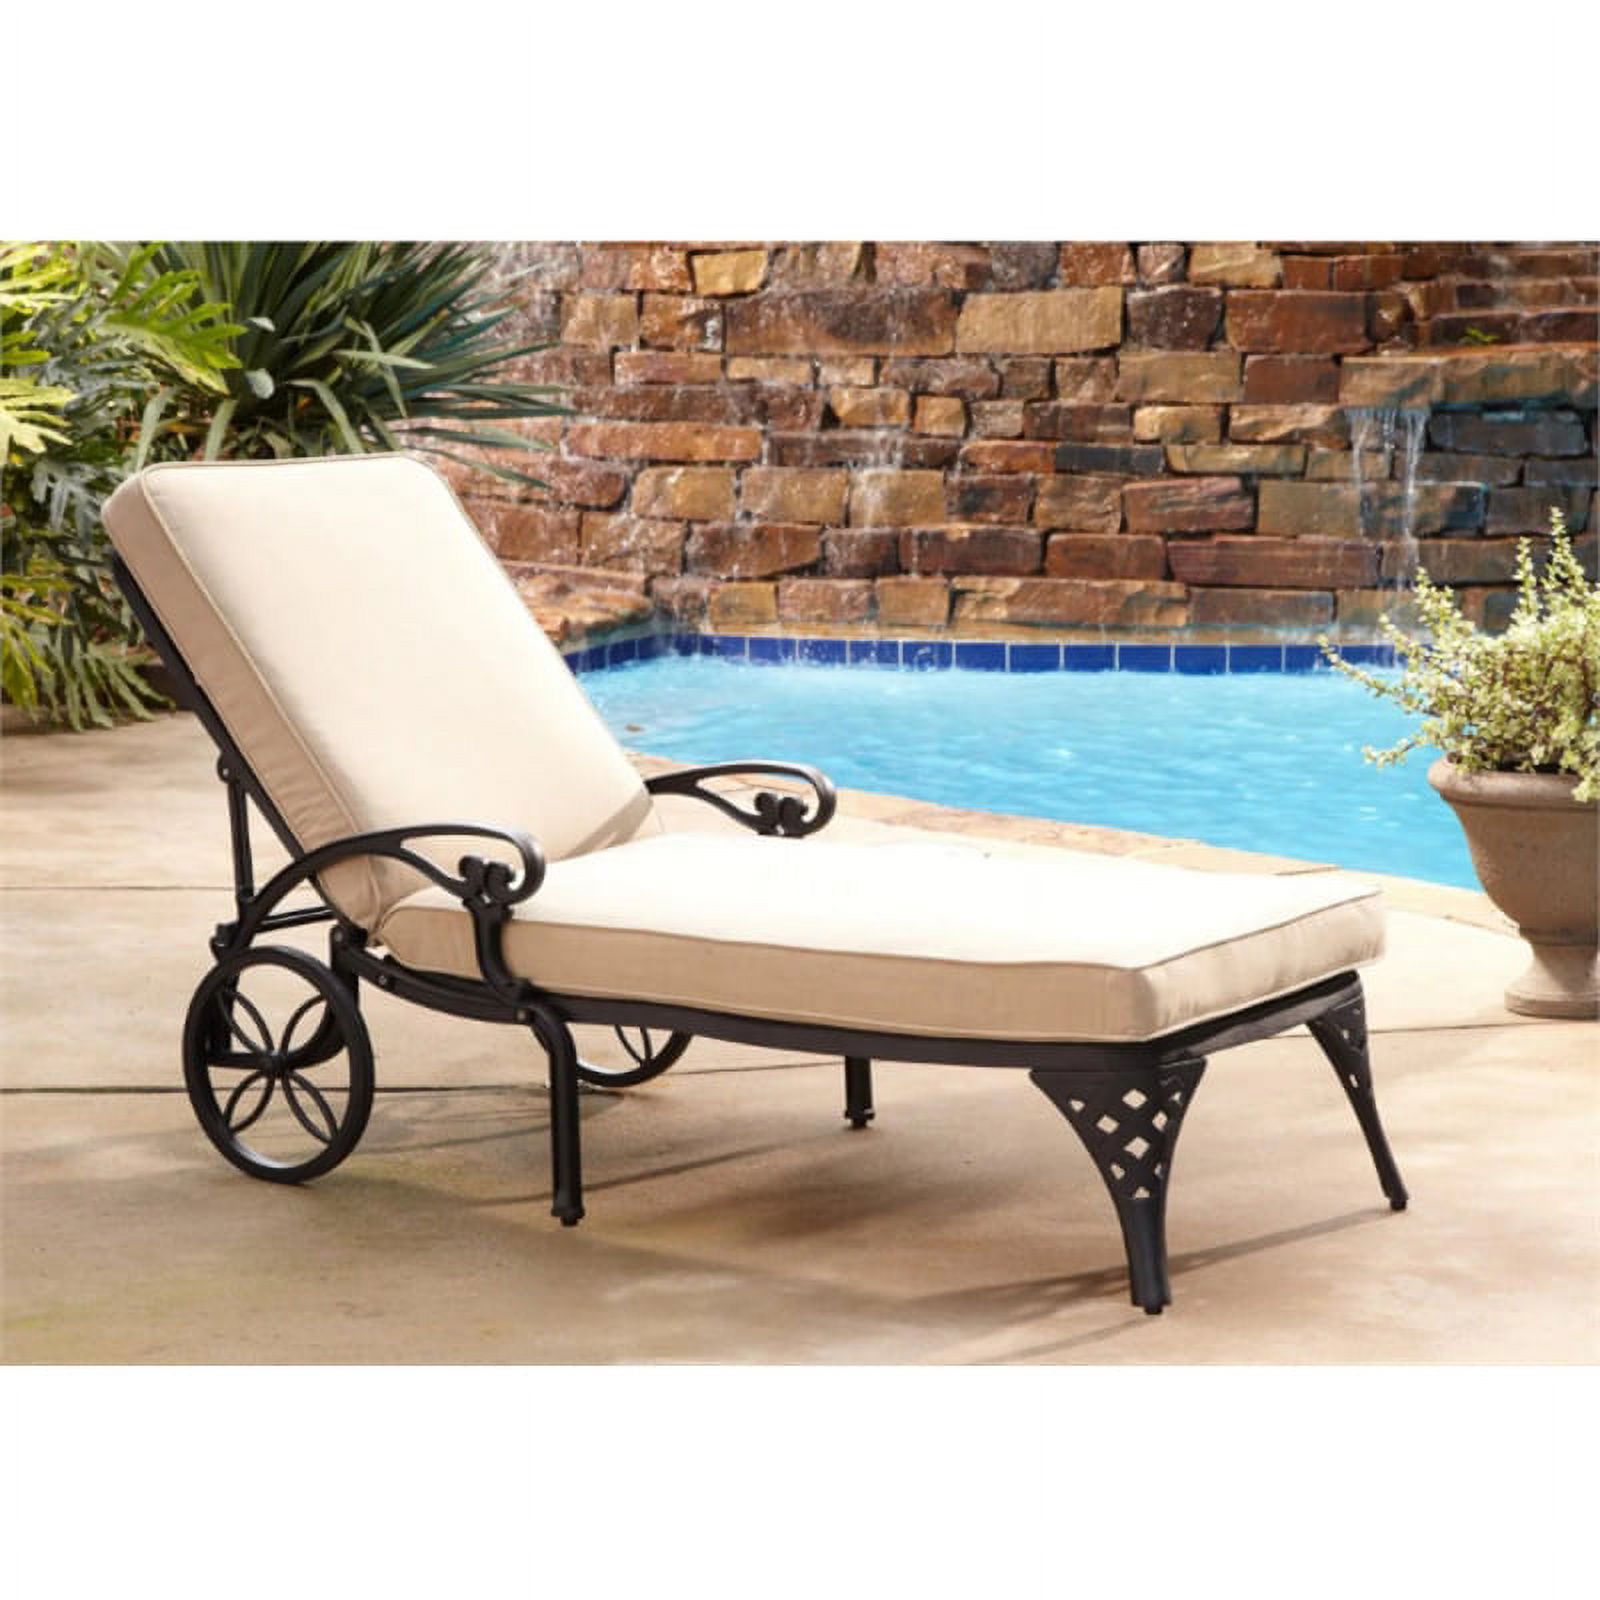 Pemberly Row Traditional Aluminum Chaise Lounge with Cushion - image 3 of 4